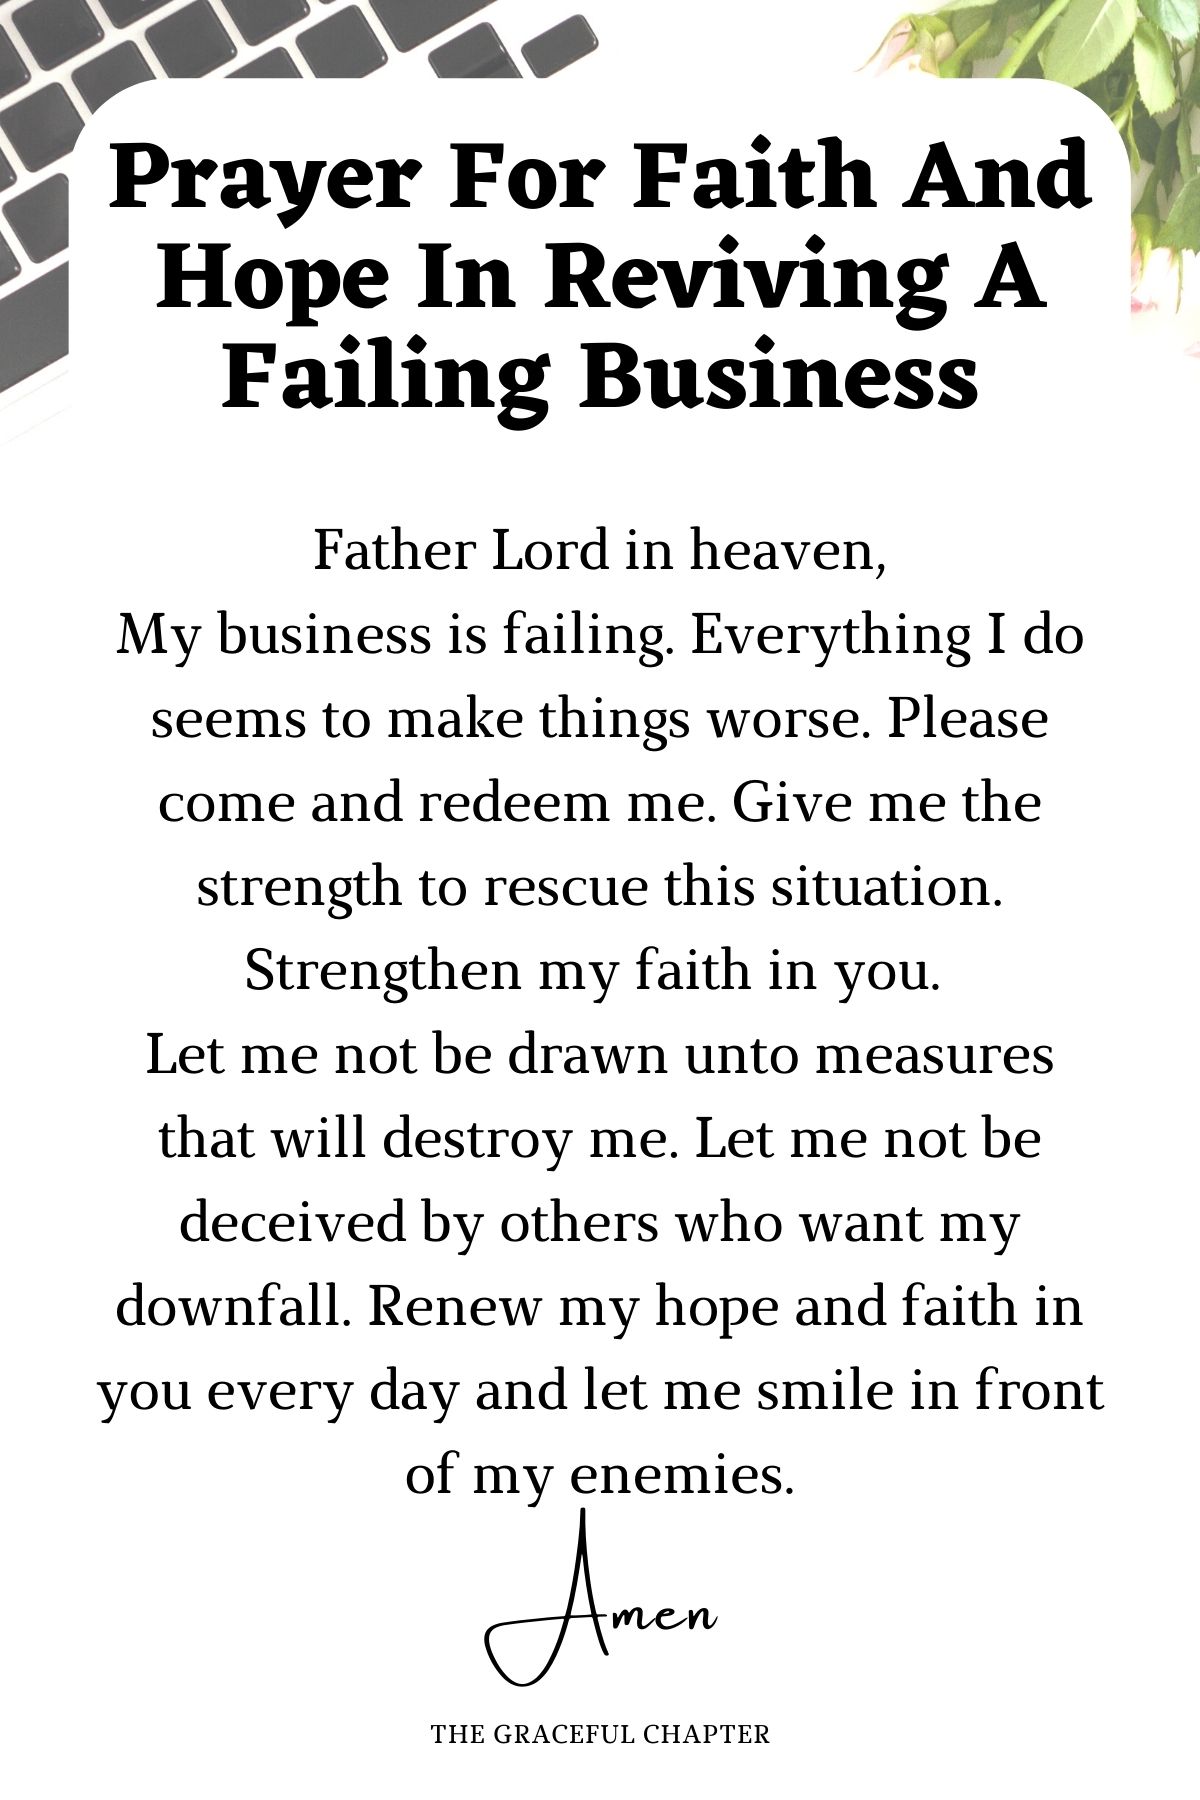 Prayer for faith and hope in reviving a failing business